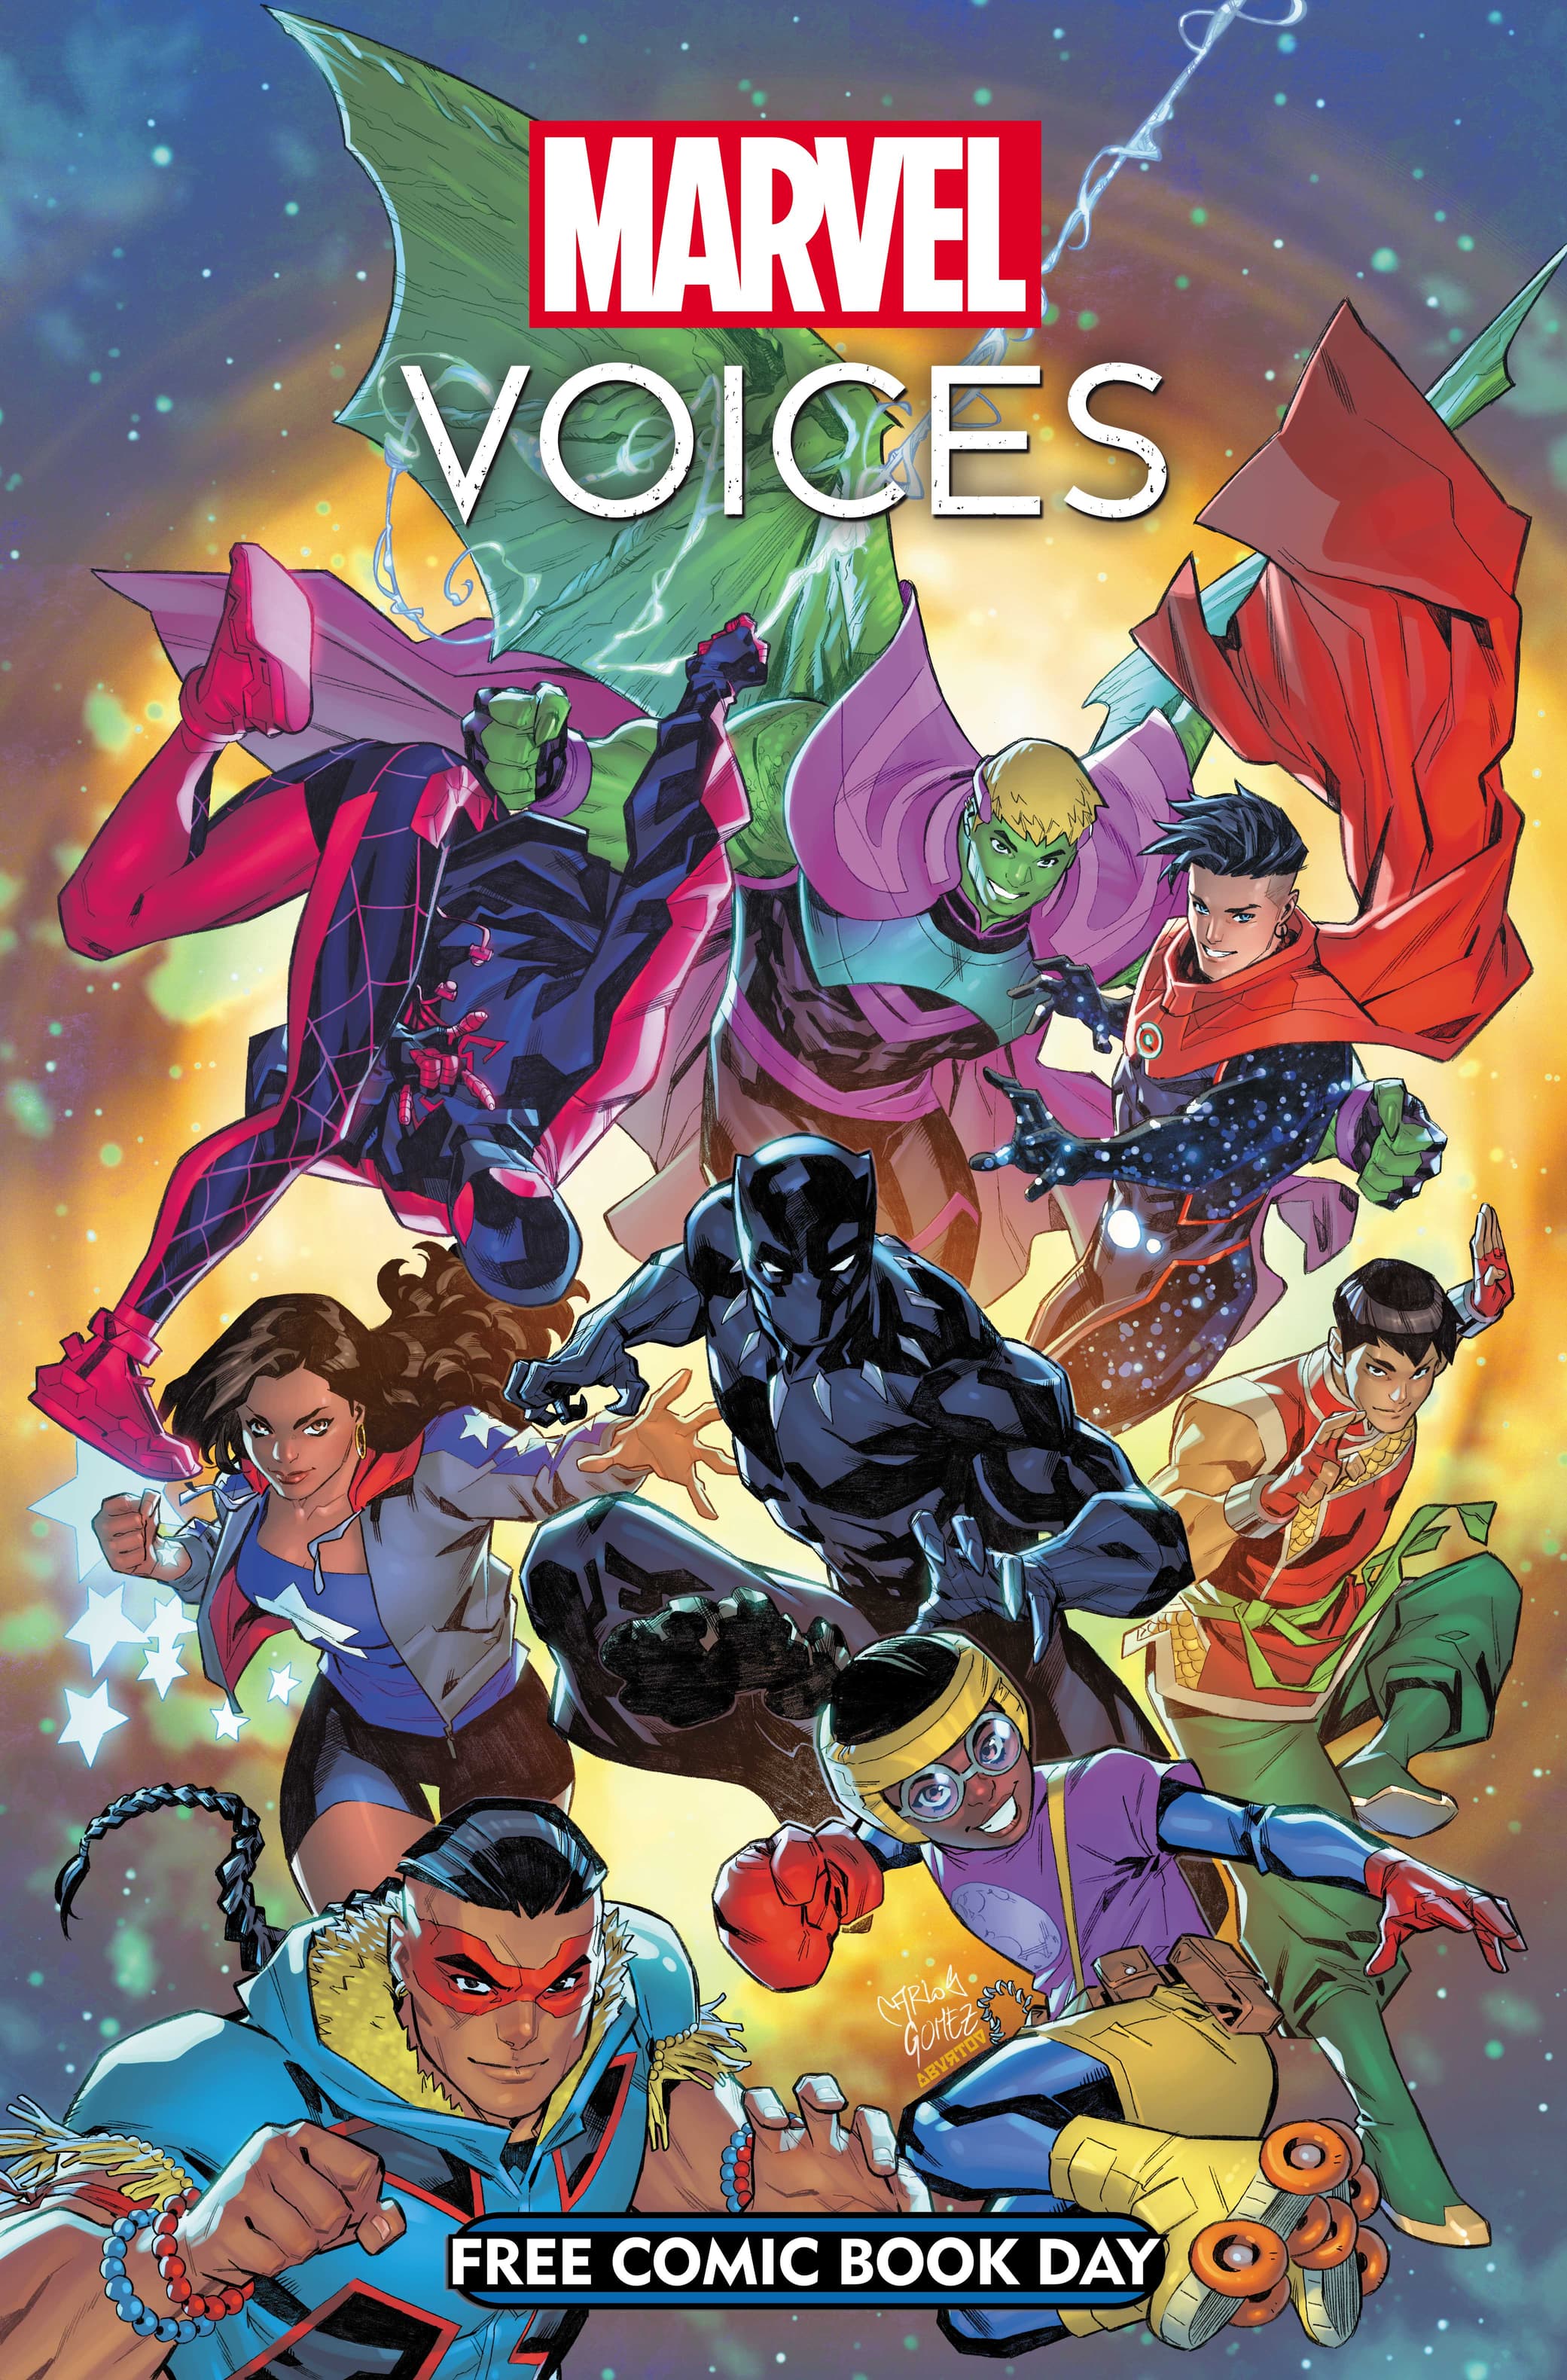 FREE COMIC BOOK DAY 2022: MARVEL’S VOICES #1